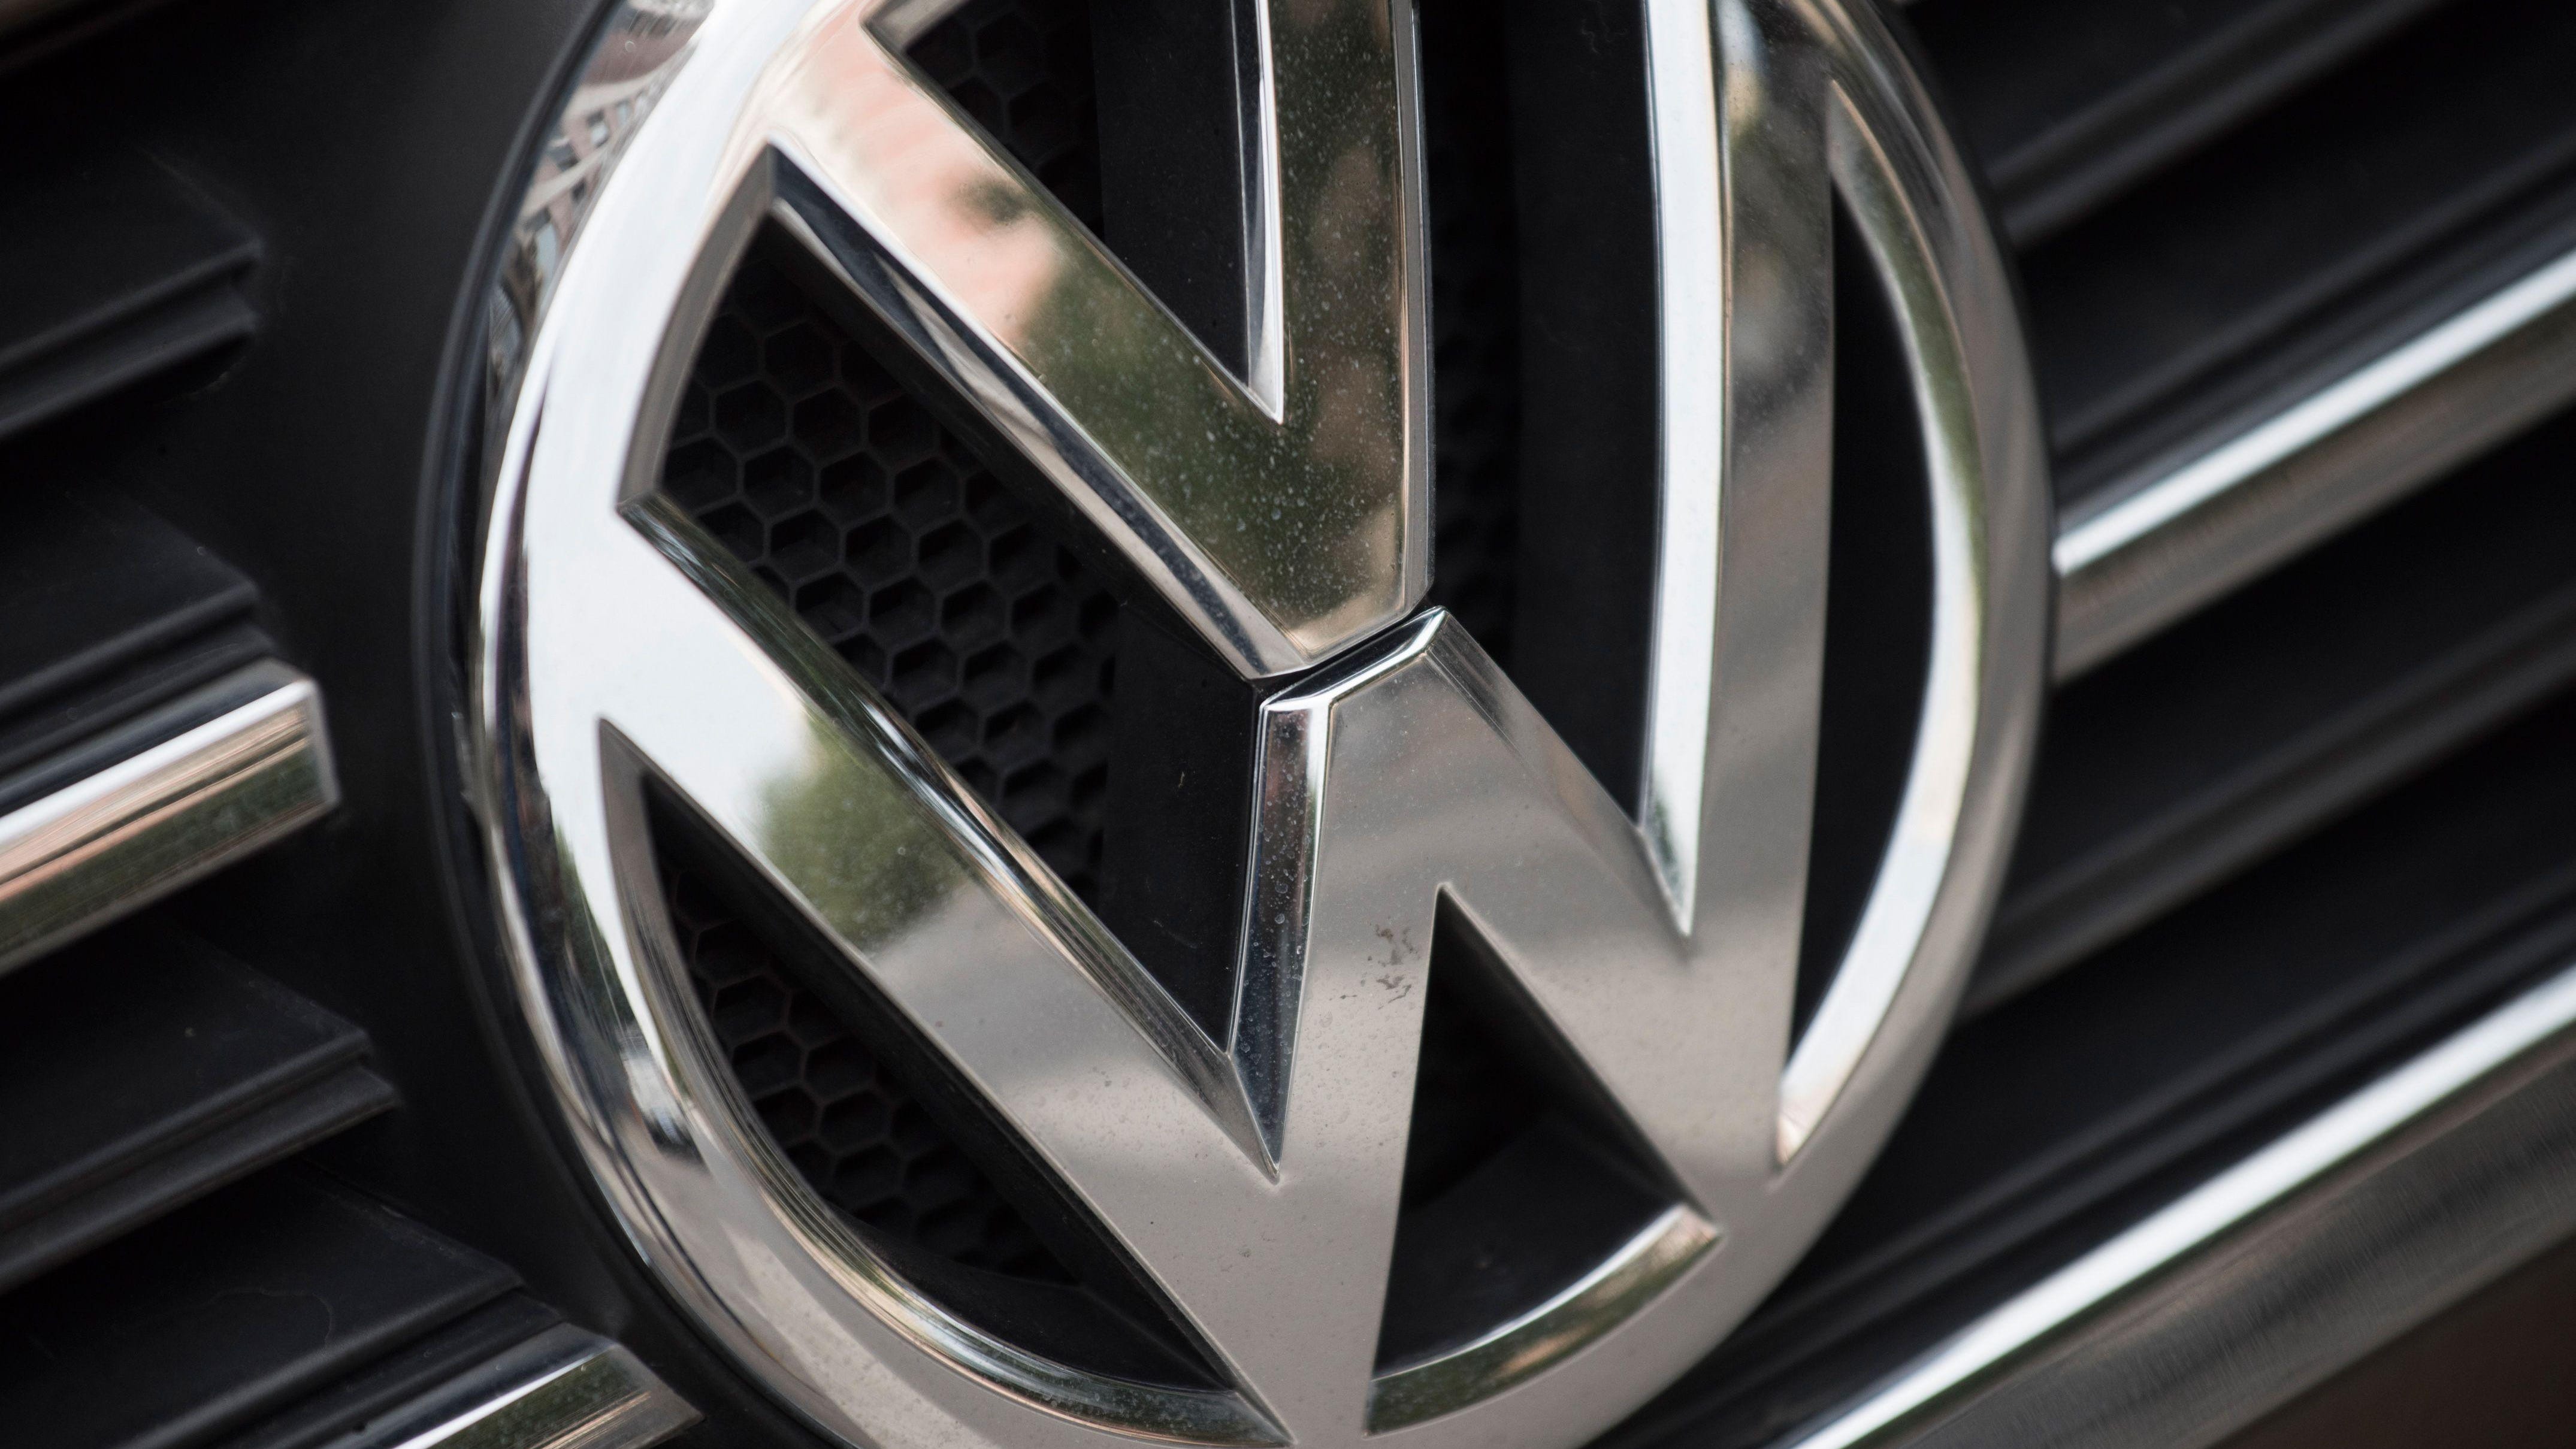 A German auto supplier, IAW GmbH, agreed to plead guilty to federal conspiracy charges and to pay a $35 million for its involvement in Volkswagen AG's global diesel emissions scandal.